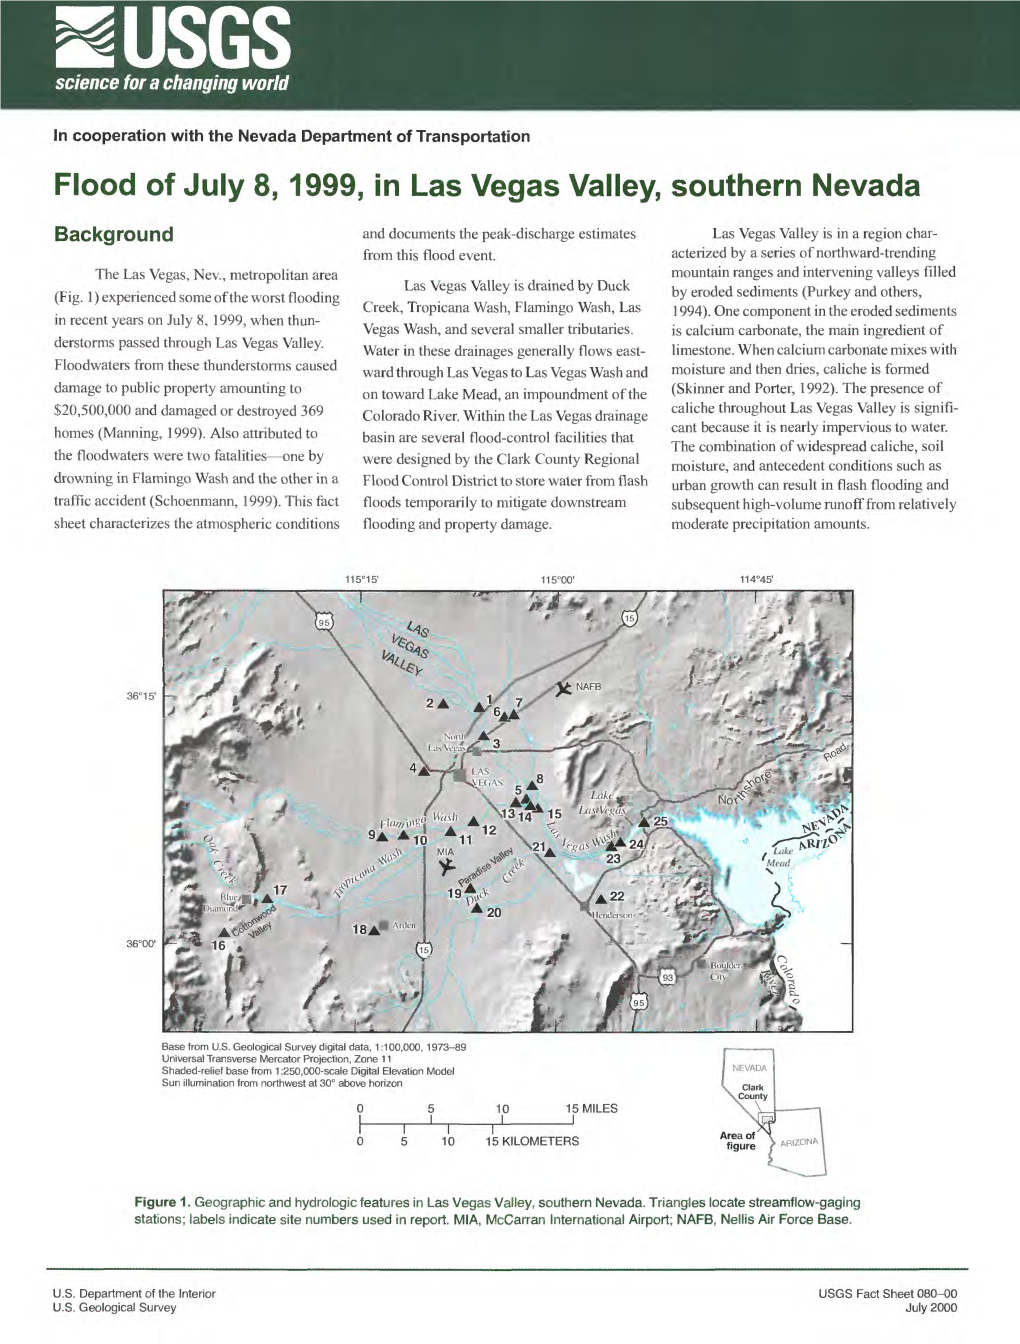 Flood of July 8,1999, in Las Vegas Valley, Southern Nevada